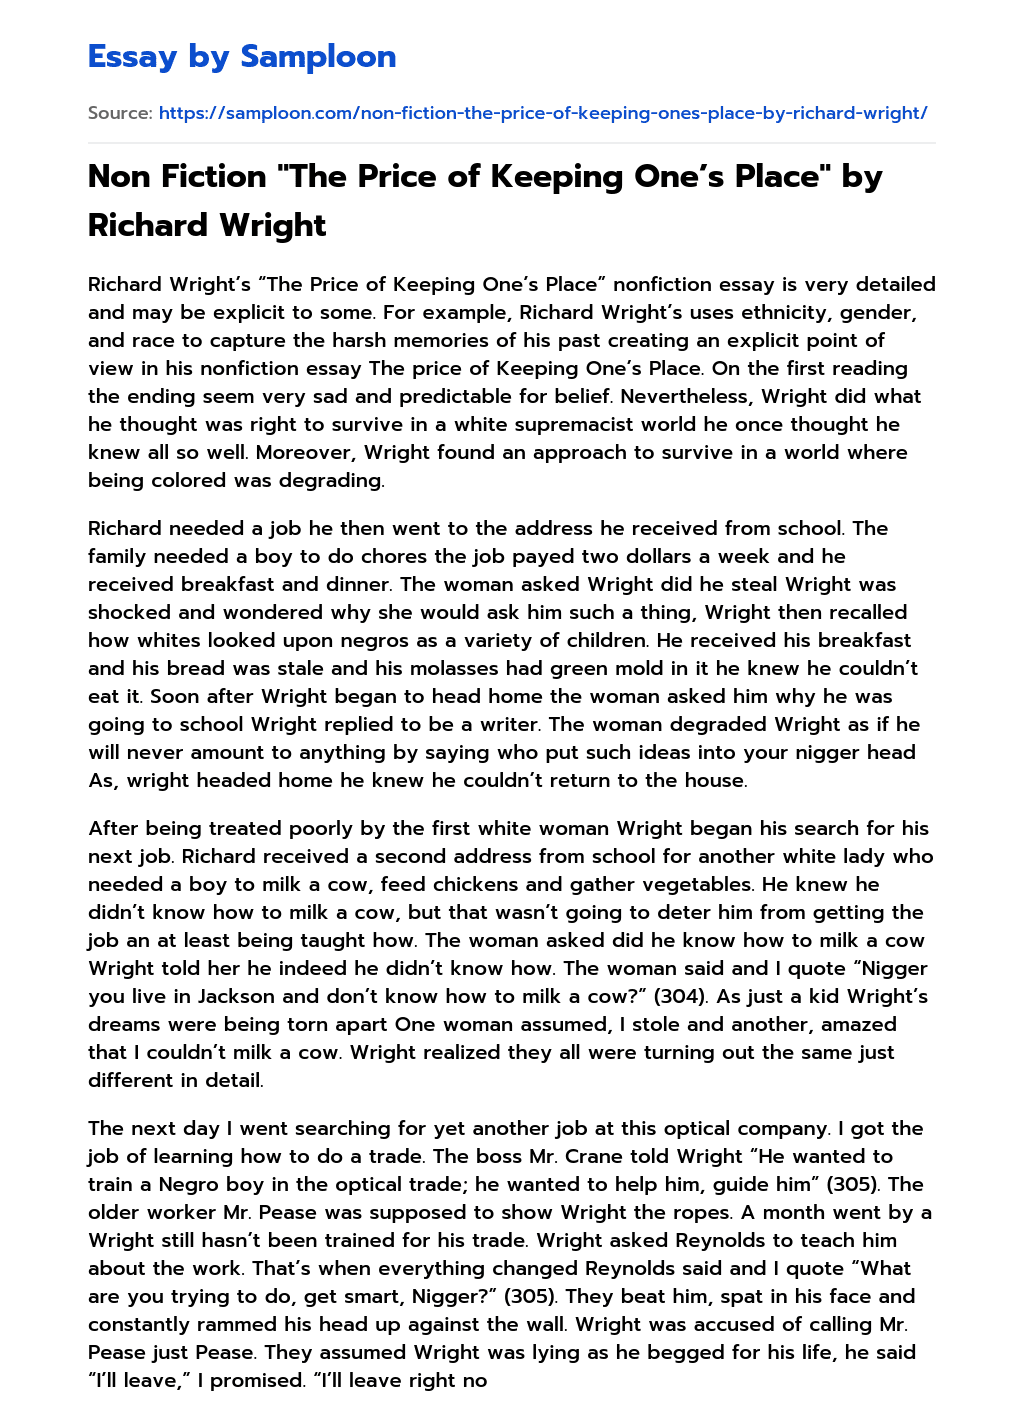 Non Fiction “The Price of Keeping One’s Place” by Richard Wright essay